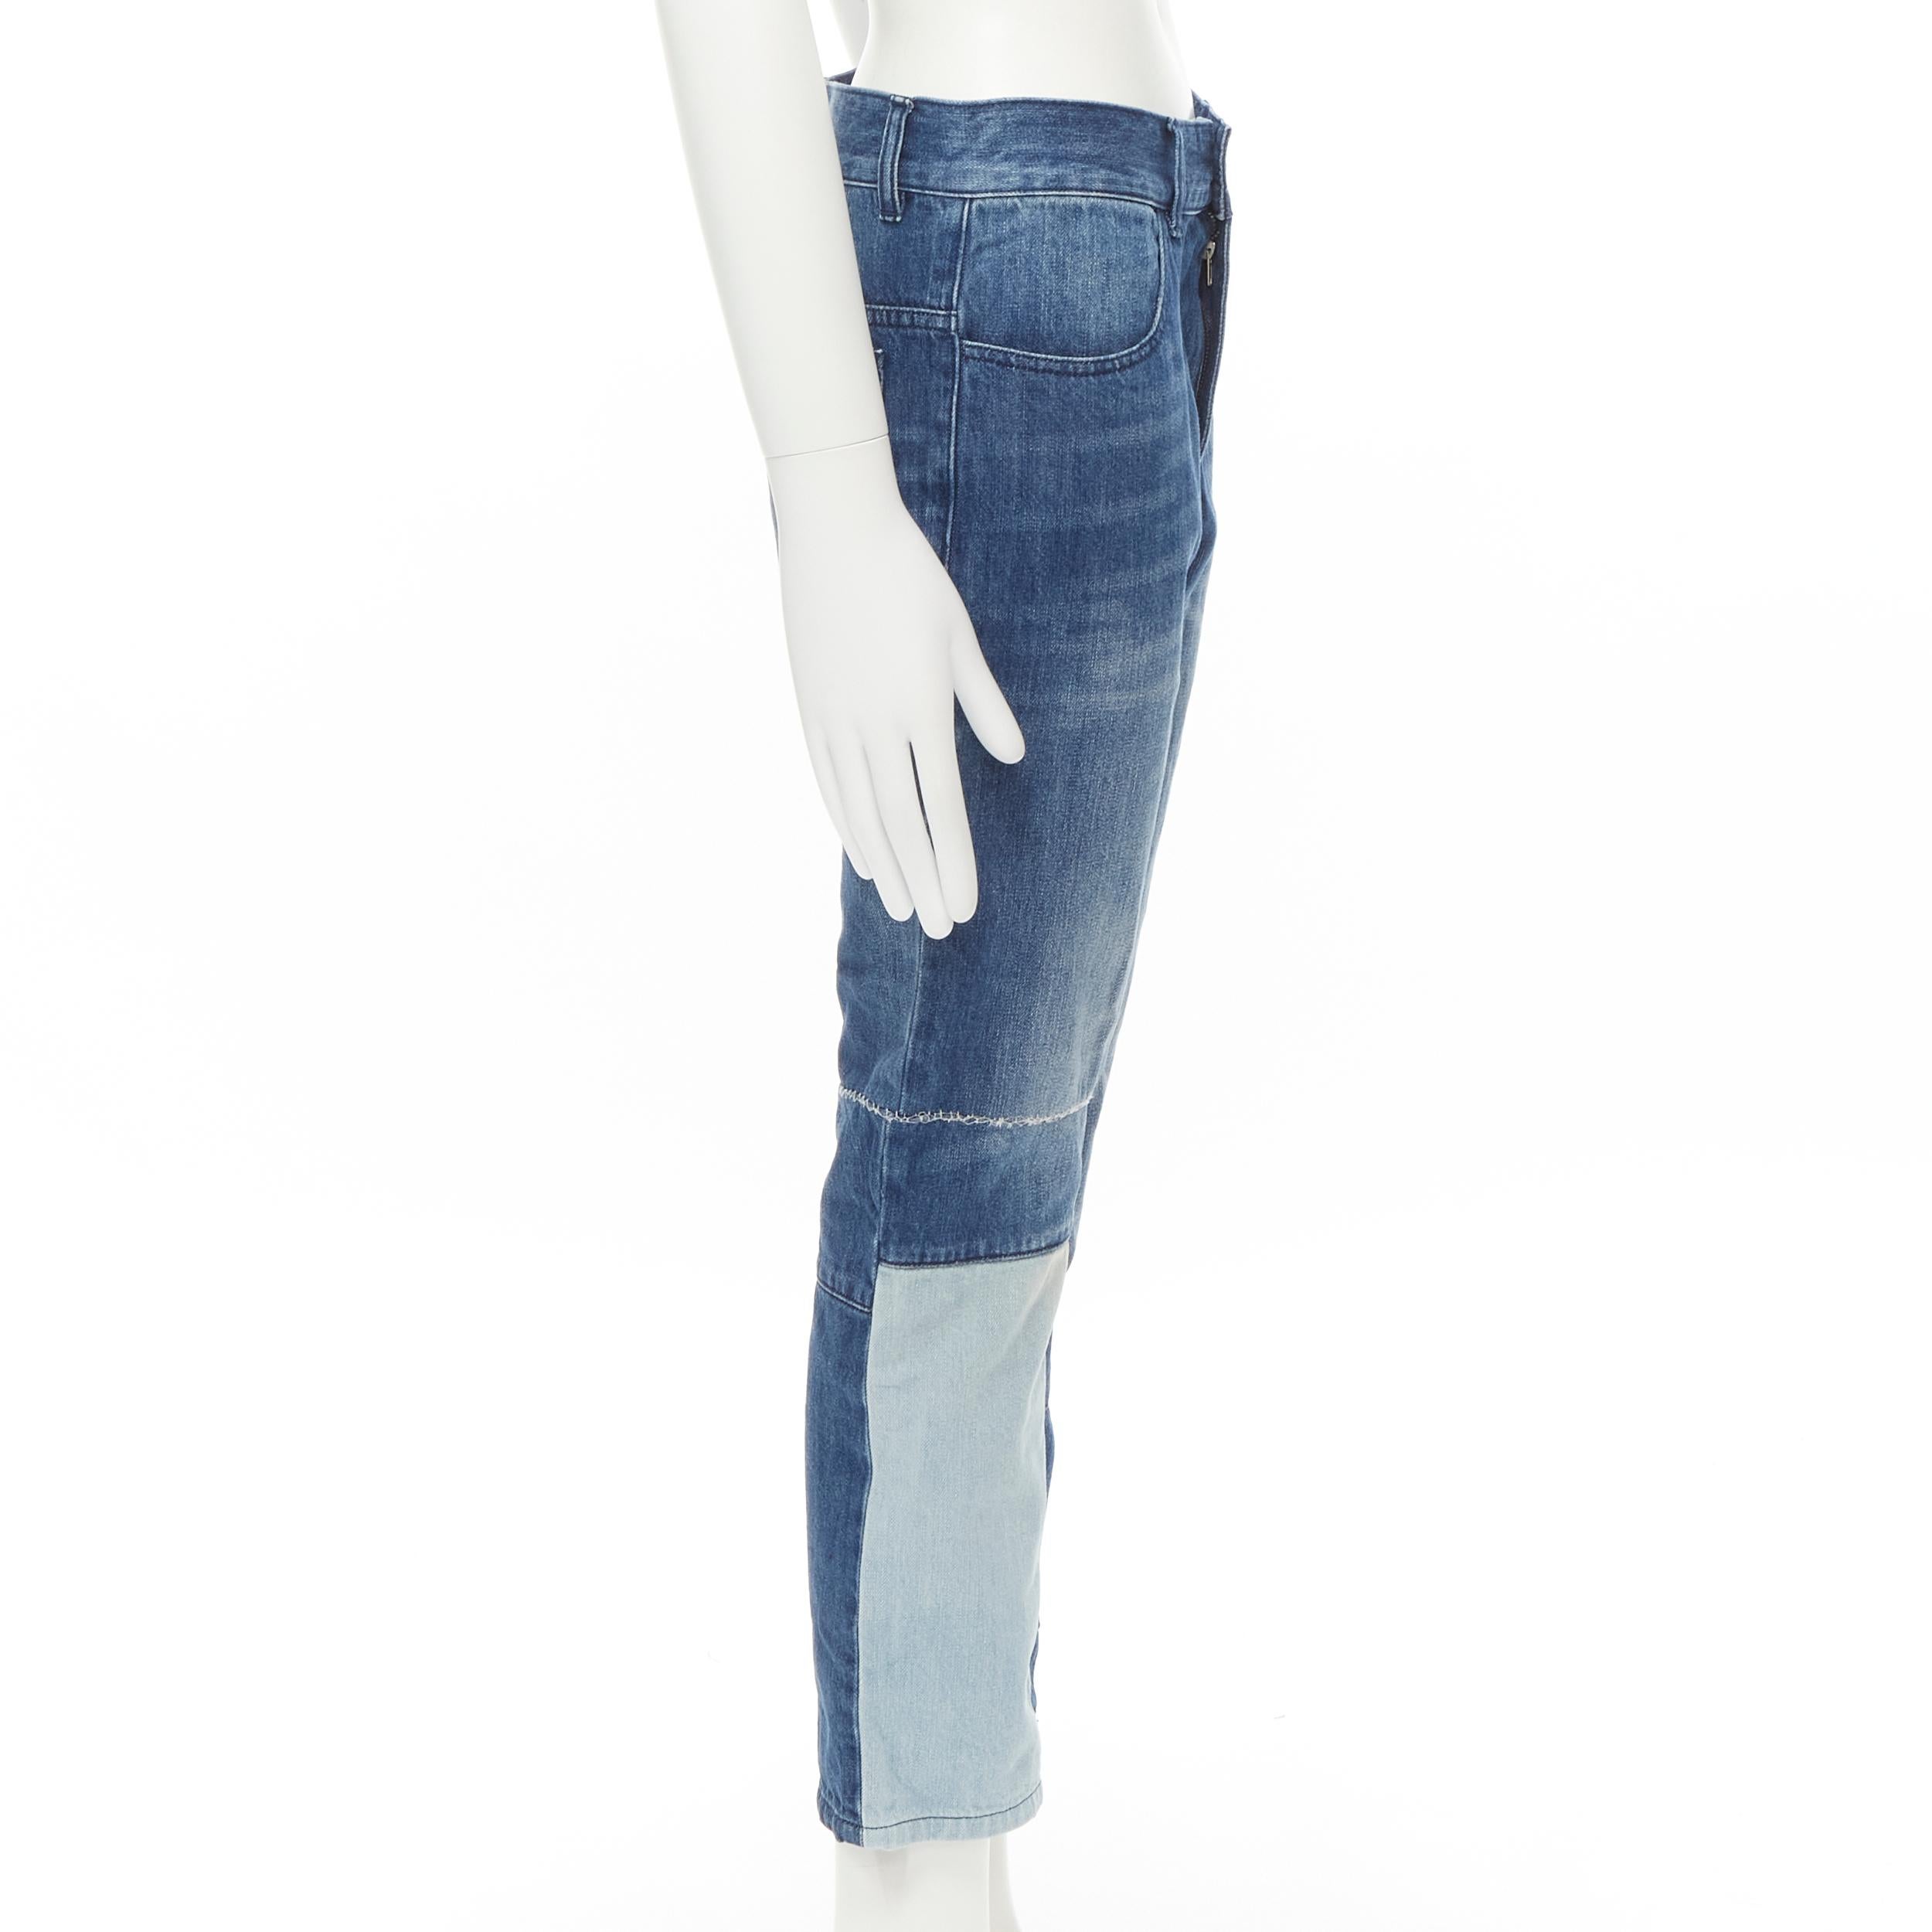 MAISON MARGEILA 2016 washed blue denim deconstructed patchwork cropped jeans 30